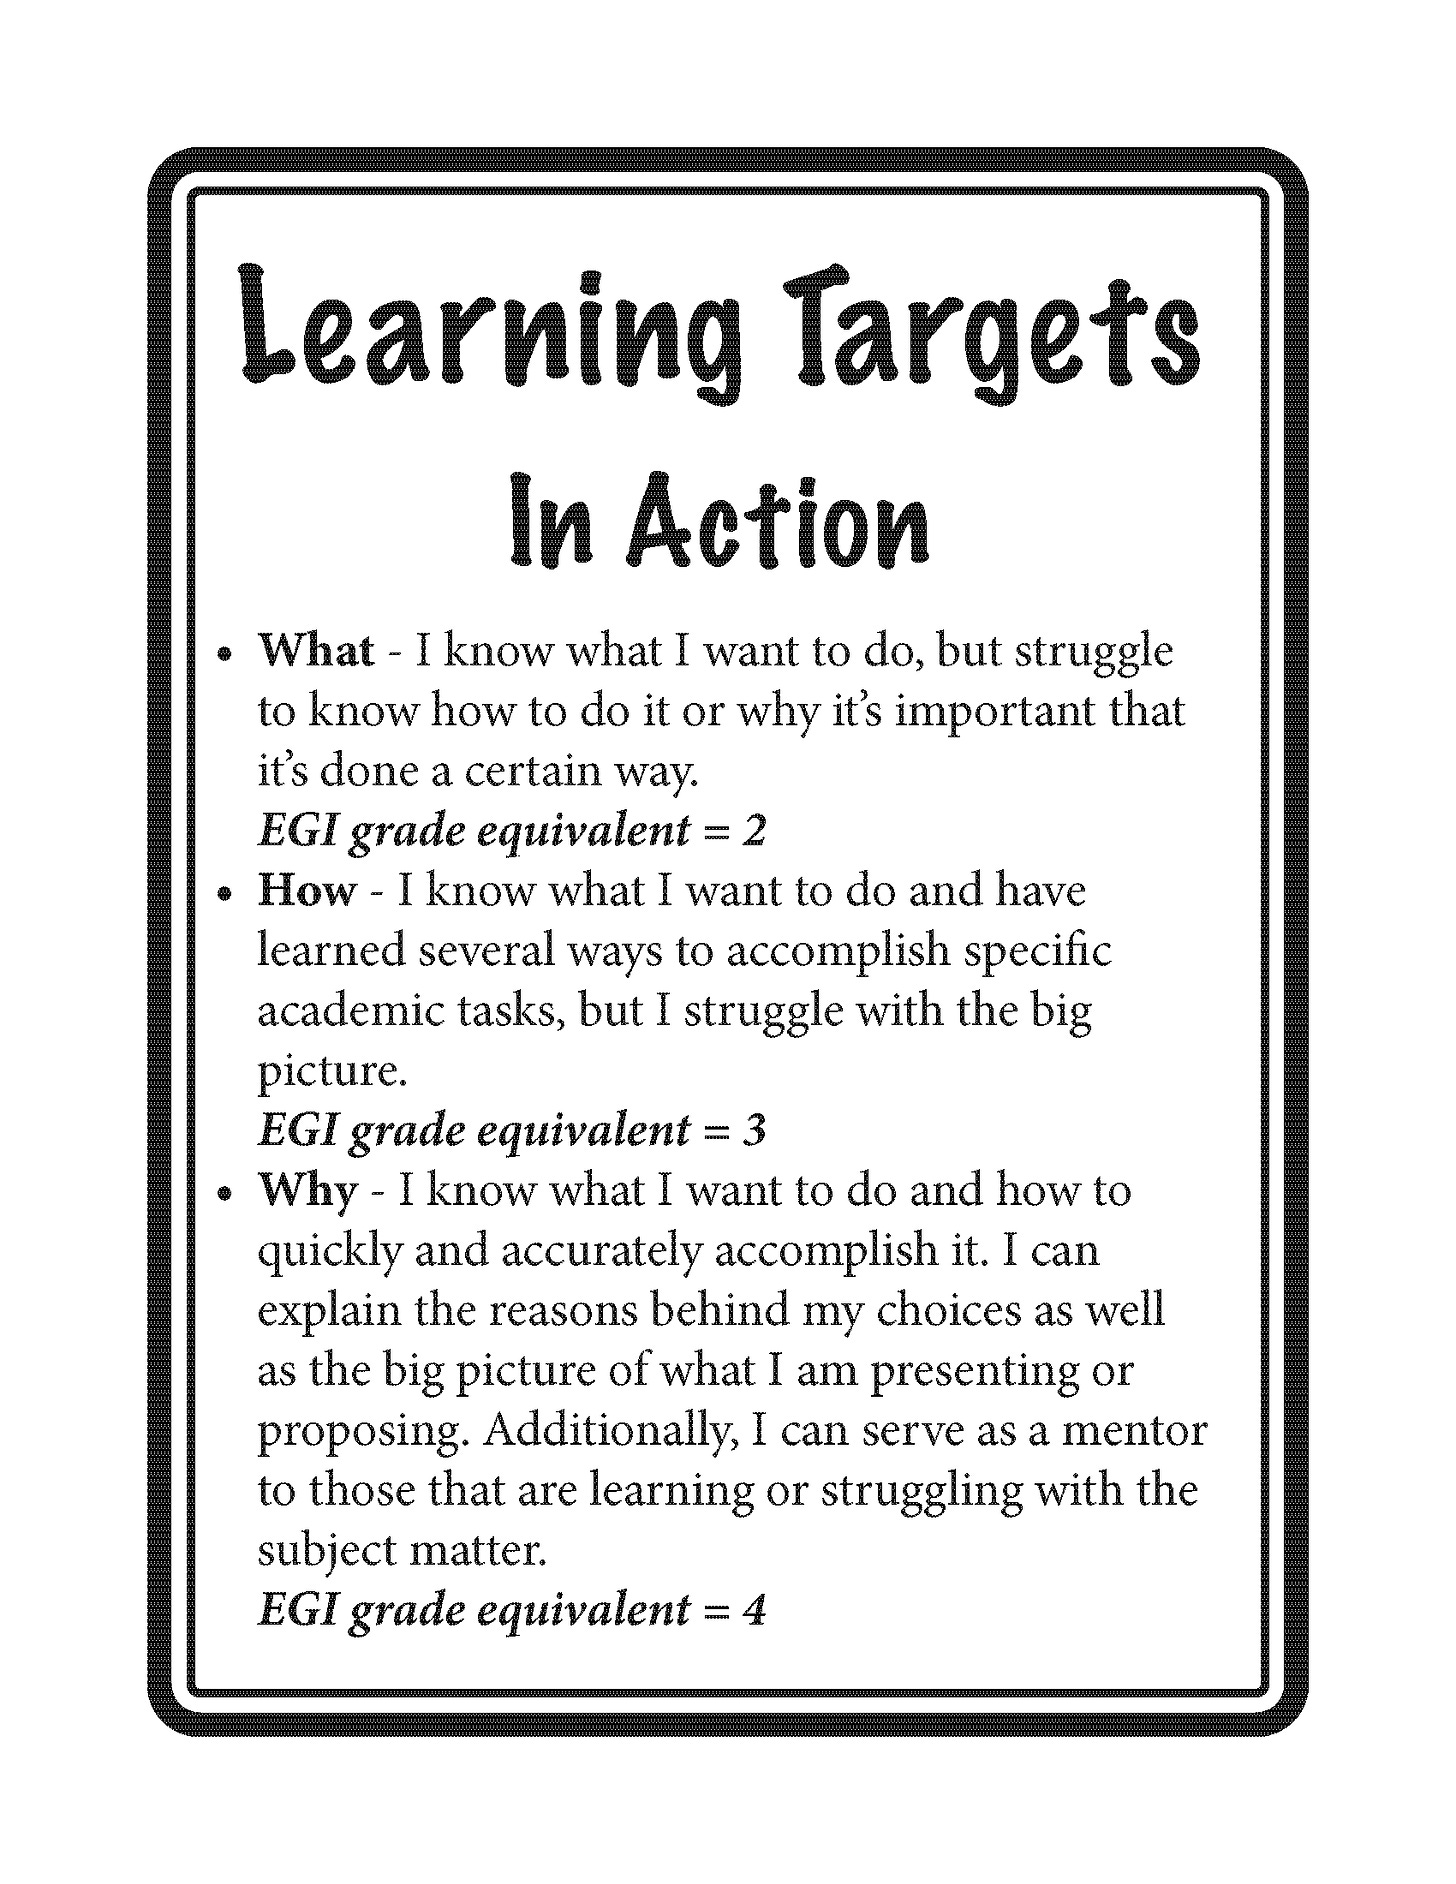 Learning Targets In Action • What - I know what I want to do, but struggle to know how to do it or why it’s important that it’s done a certain way. EGI grade equivalent = 2 • How - I know what I want to do and have learned several ways to accomplish specific academic tasks, but I struggle with the big picture. EGI grade equivalent = 3 • Why - I know what I want to do and how to quickly and accurately accomplish it. I can explain the reasons behind my choices as well as the big picture of what I am presenting or proposing. Additionally, I can serve as a mentor to those that are learning or struggling with the subject matter. EGI grade equivalent = 4